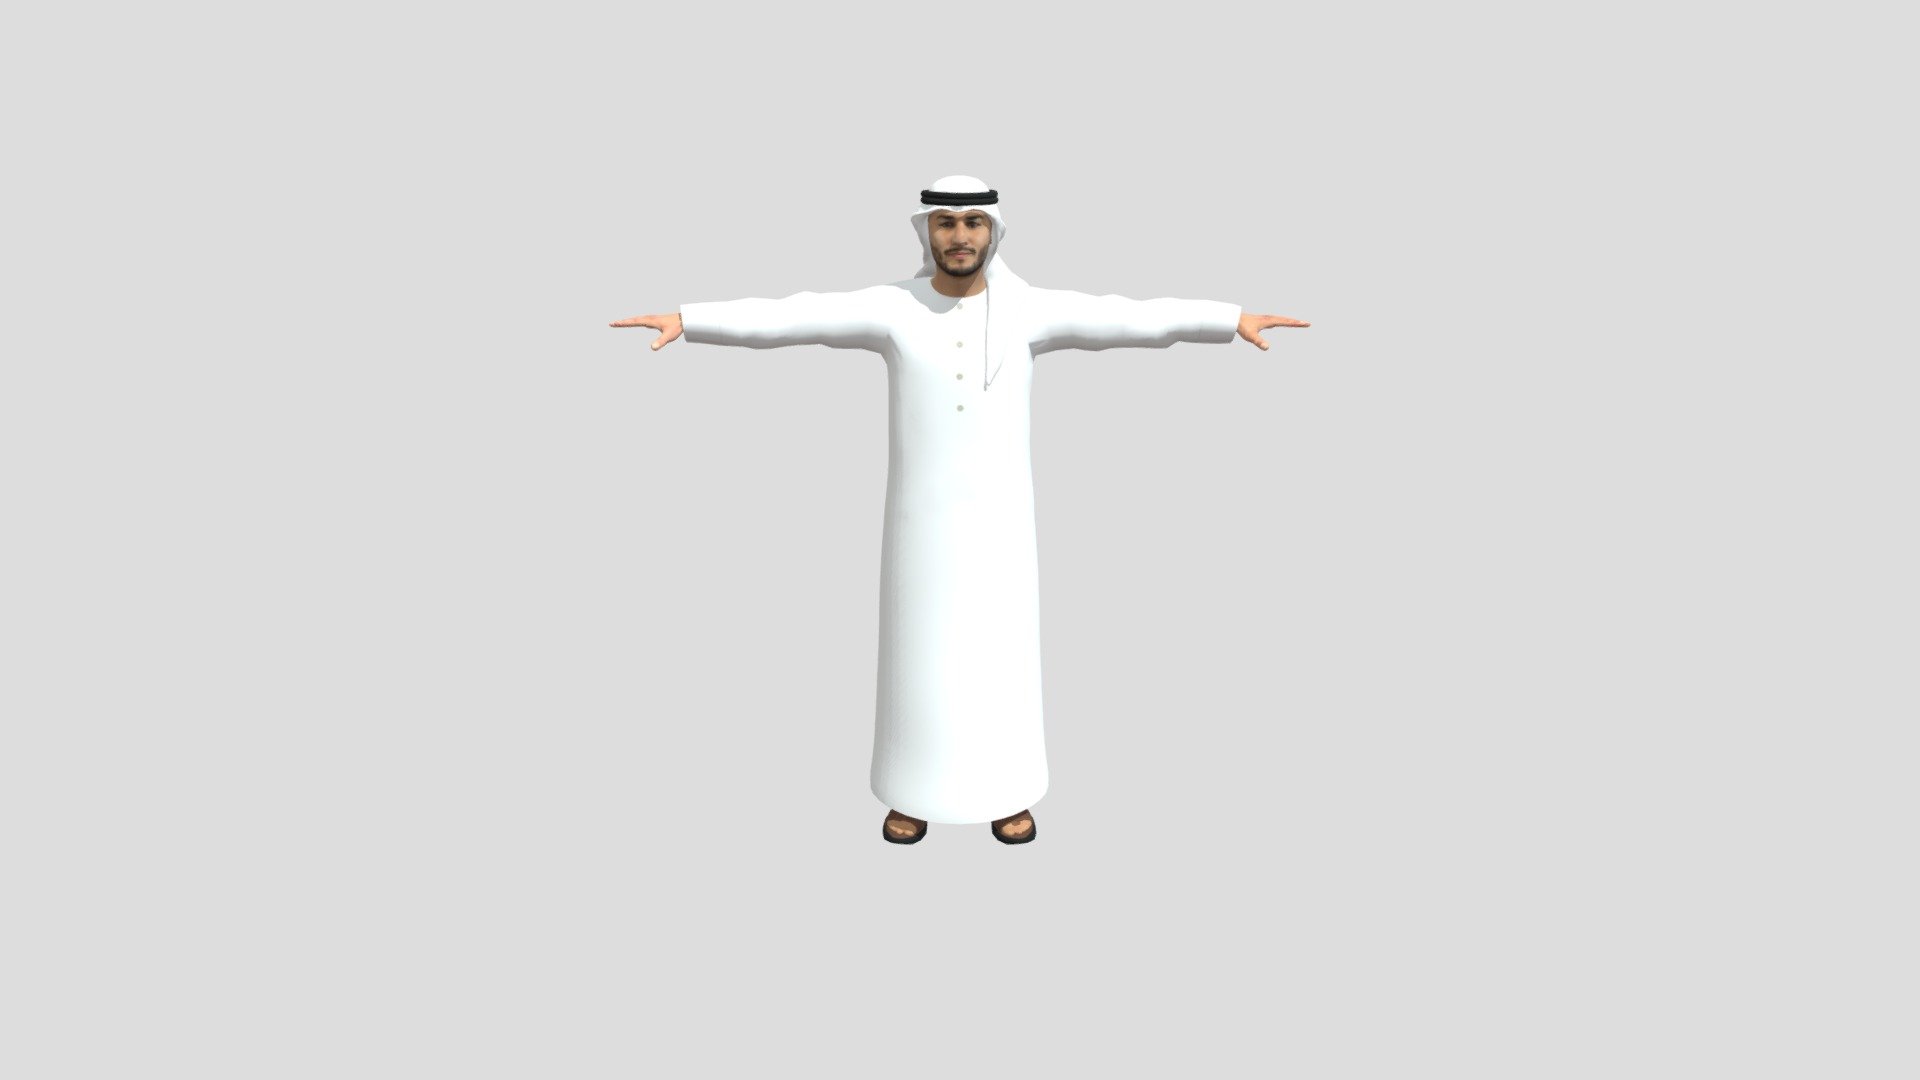 Emarati Male in Local Dress (FBX) - Fully Rigged with Facial Expressions Blendshapes - Emarati Male in Local Dress (Rigged+Expressions) - Buy Royalty Free 3D model by XtremeZero 3d model